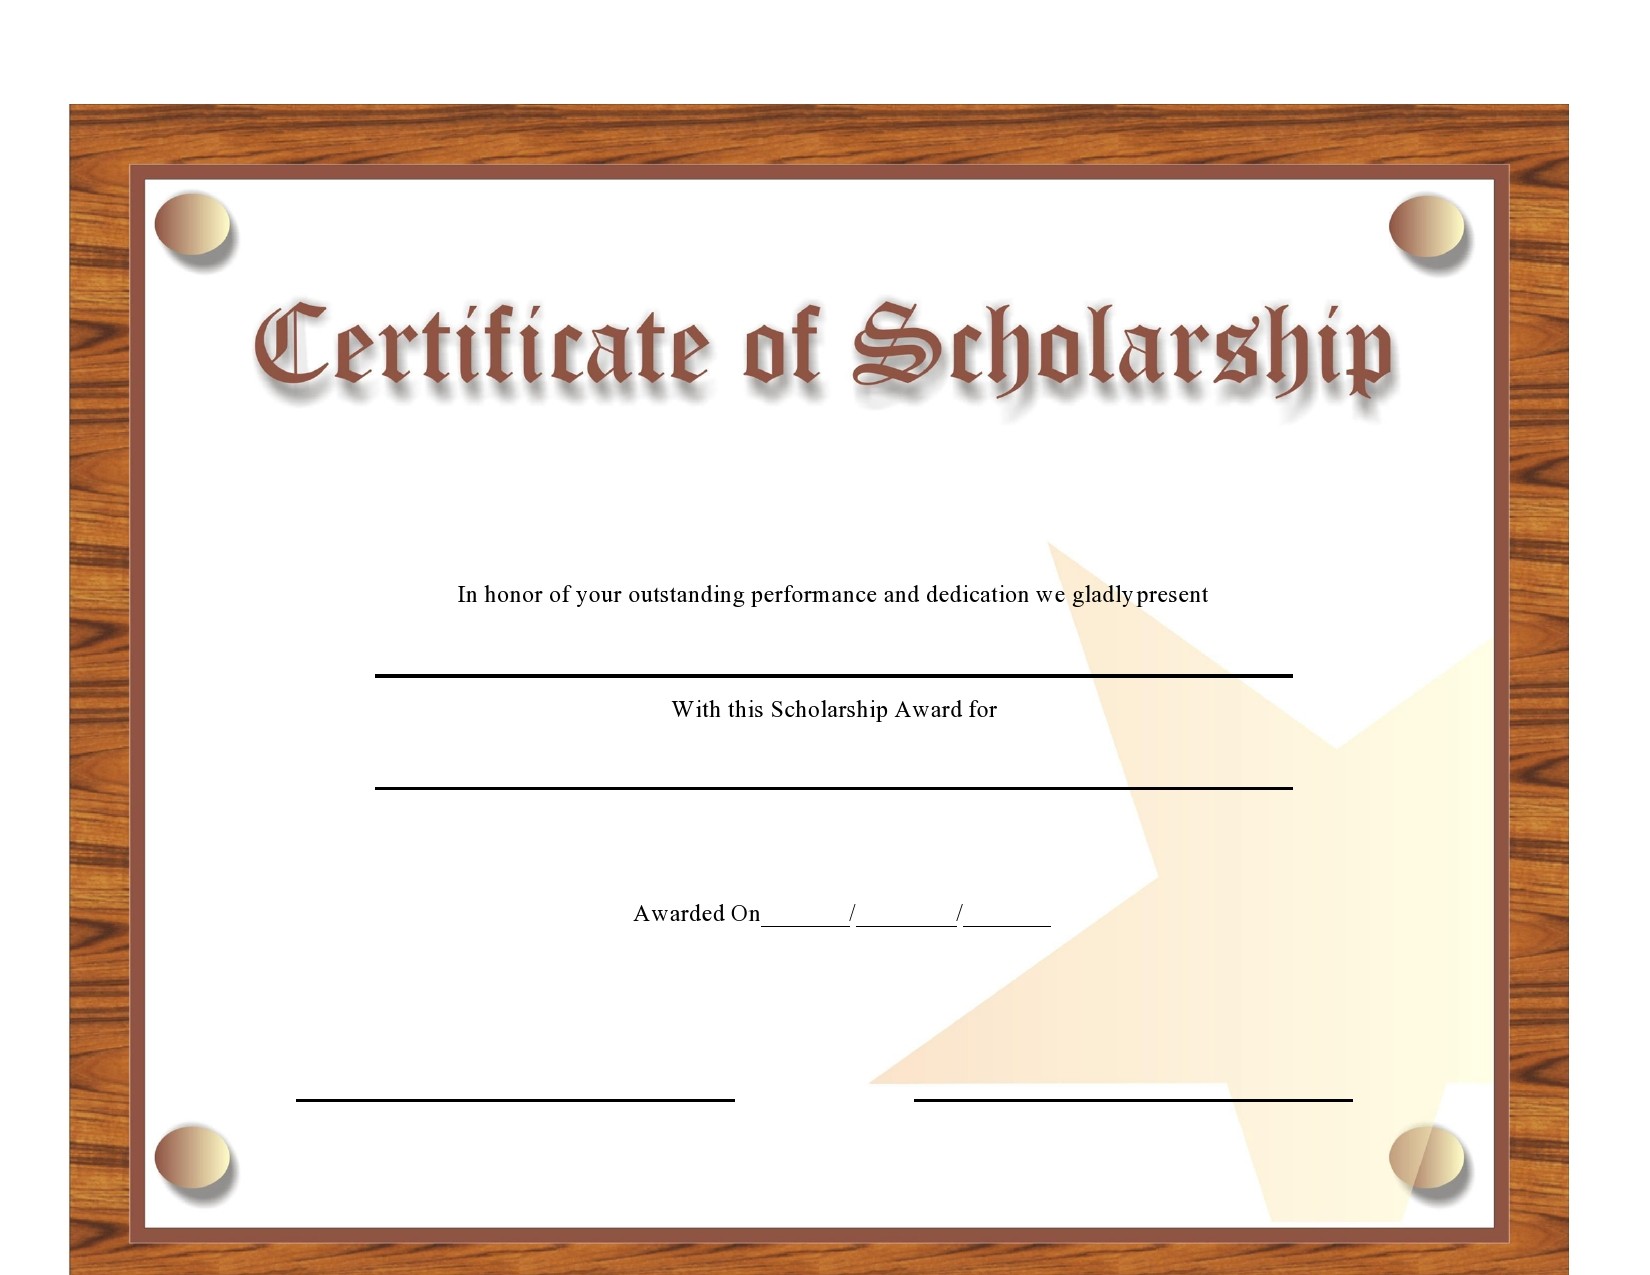 Certificate Of Scholarship Template